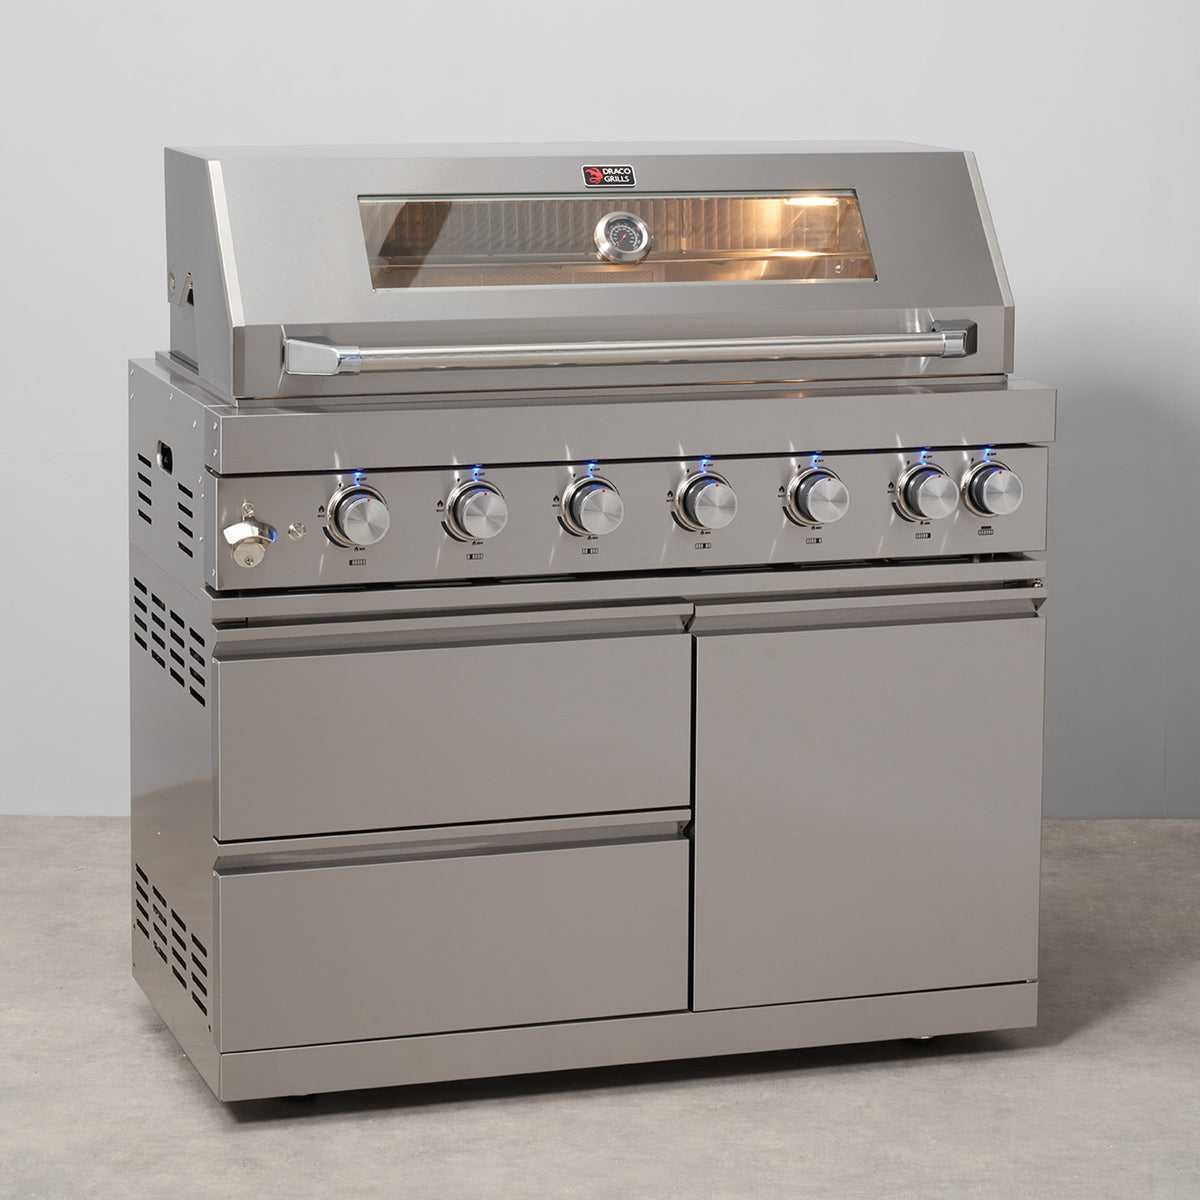 Draco Grills Z640 Deluxe 6 Burner Stainless Steel Gas Barbecue with Cabinet